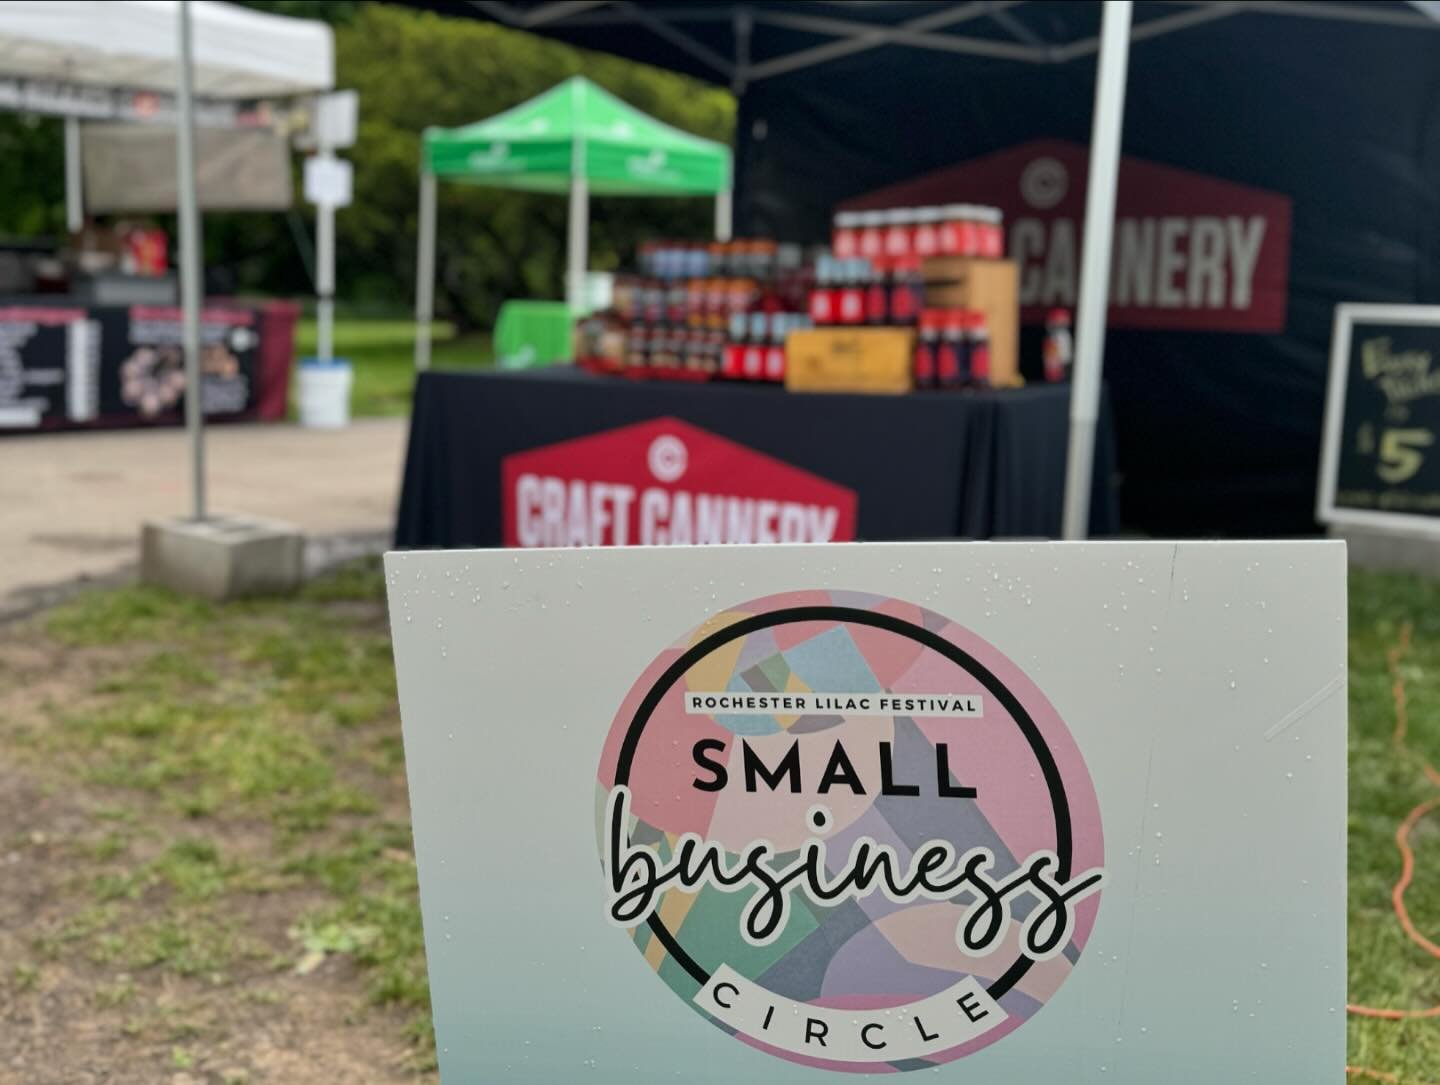 Find us in the NEW @roclilacfest Small Business Circle (up near the reservoir) all weekend with ALL Guglielmo&rsquo;s flavors (including specialty runs and seasonals), SLOW. Sauces (including free samples of our meat sauce), and SALSAcuse!